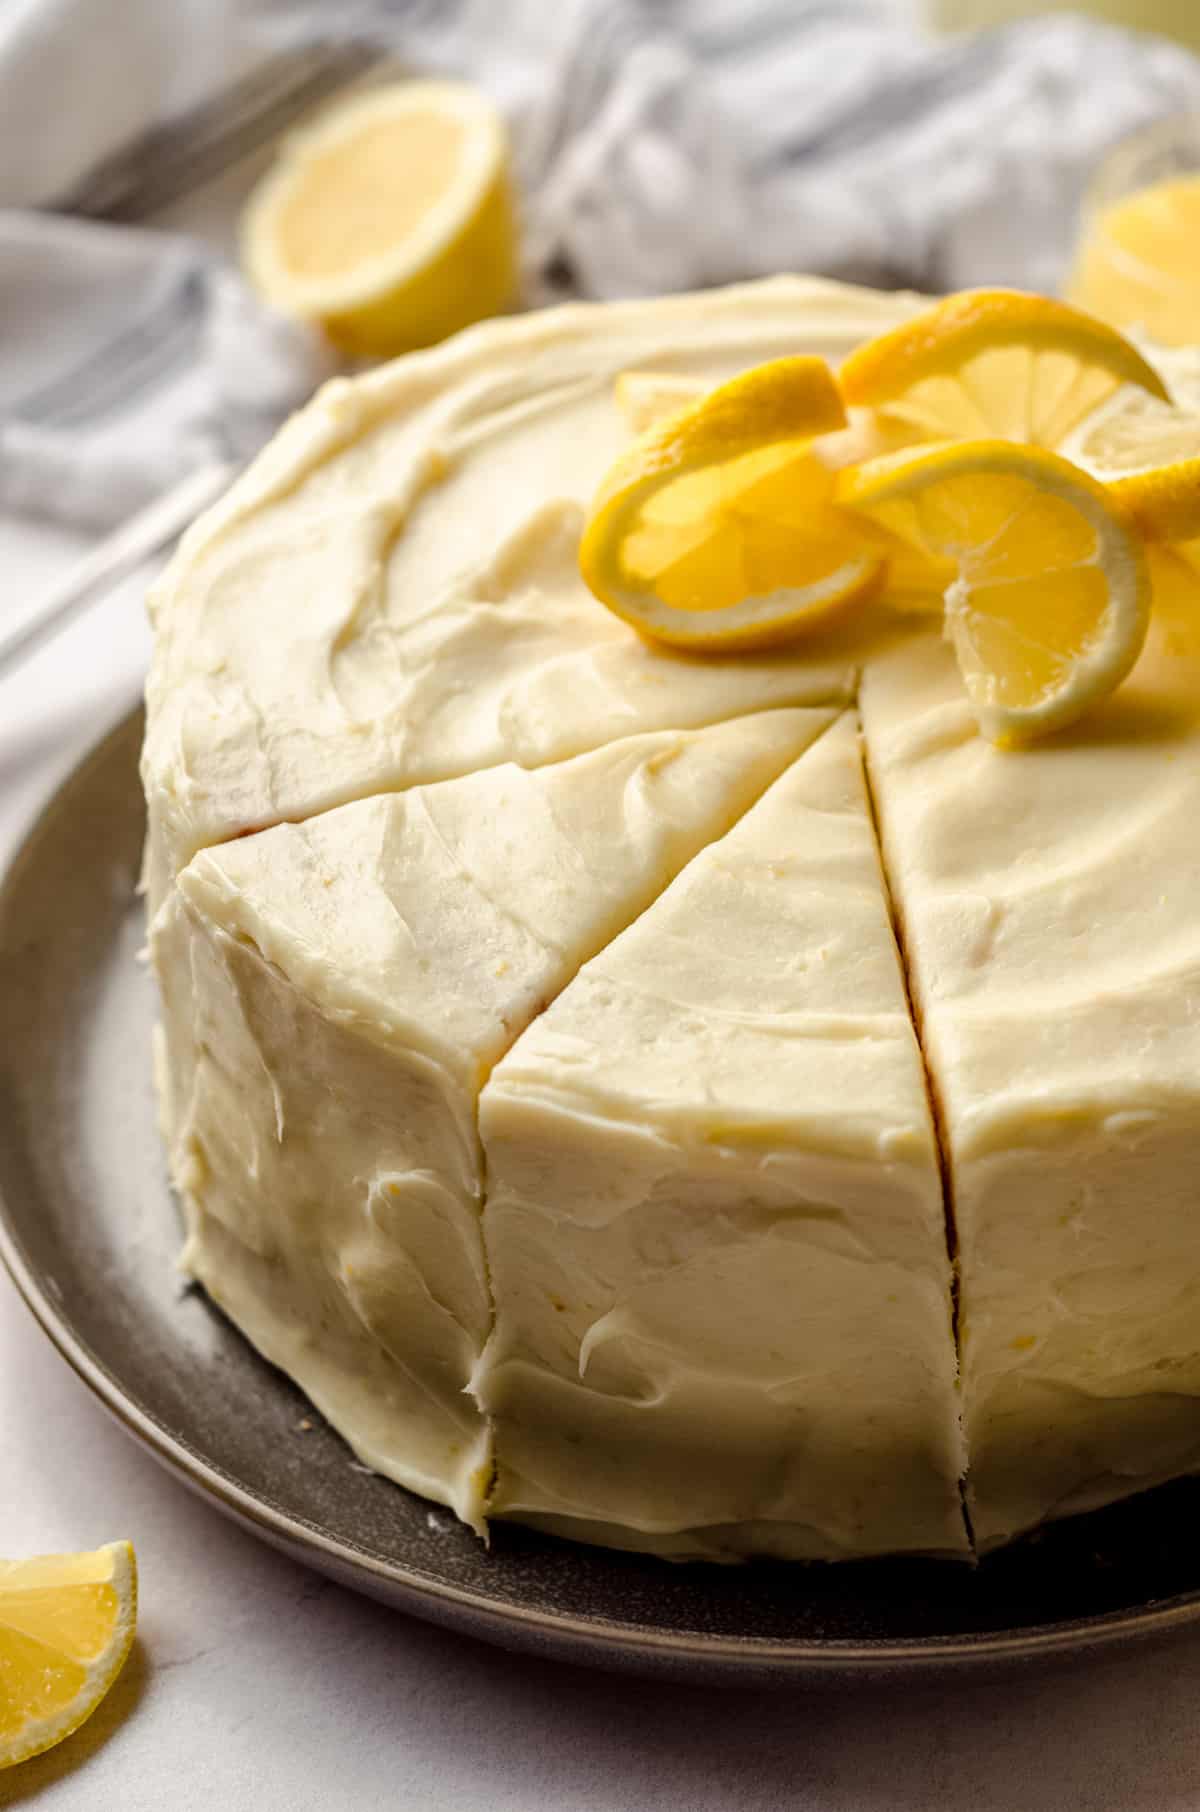 A lemon cake decorated with lemon slices and cut into wedges.